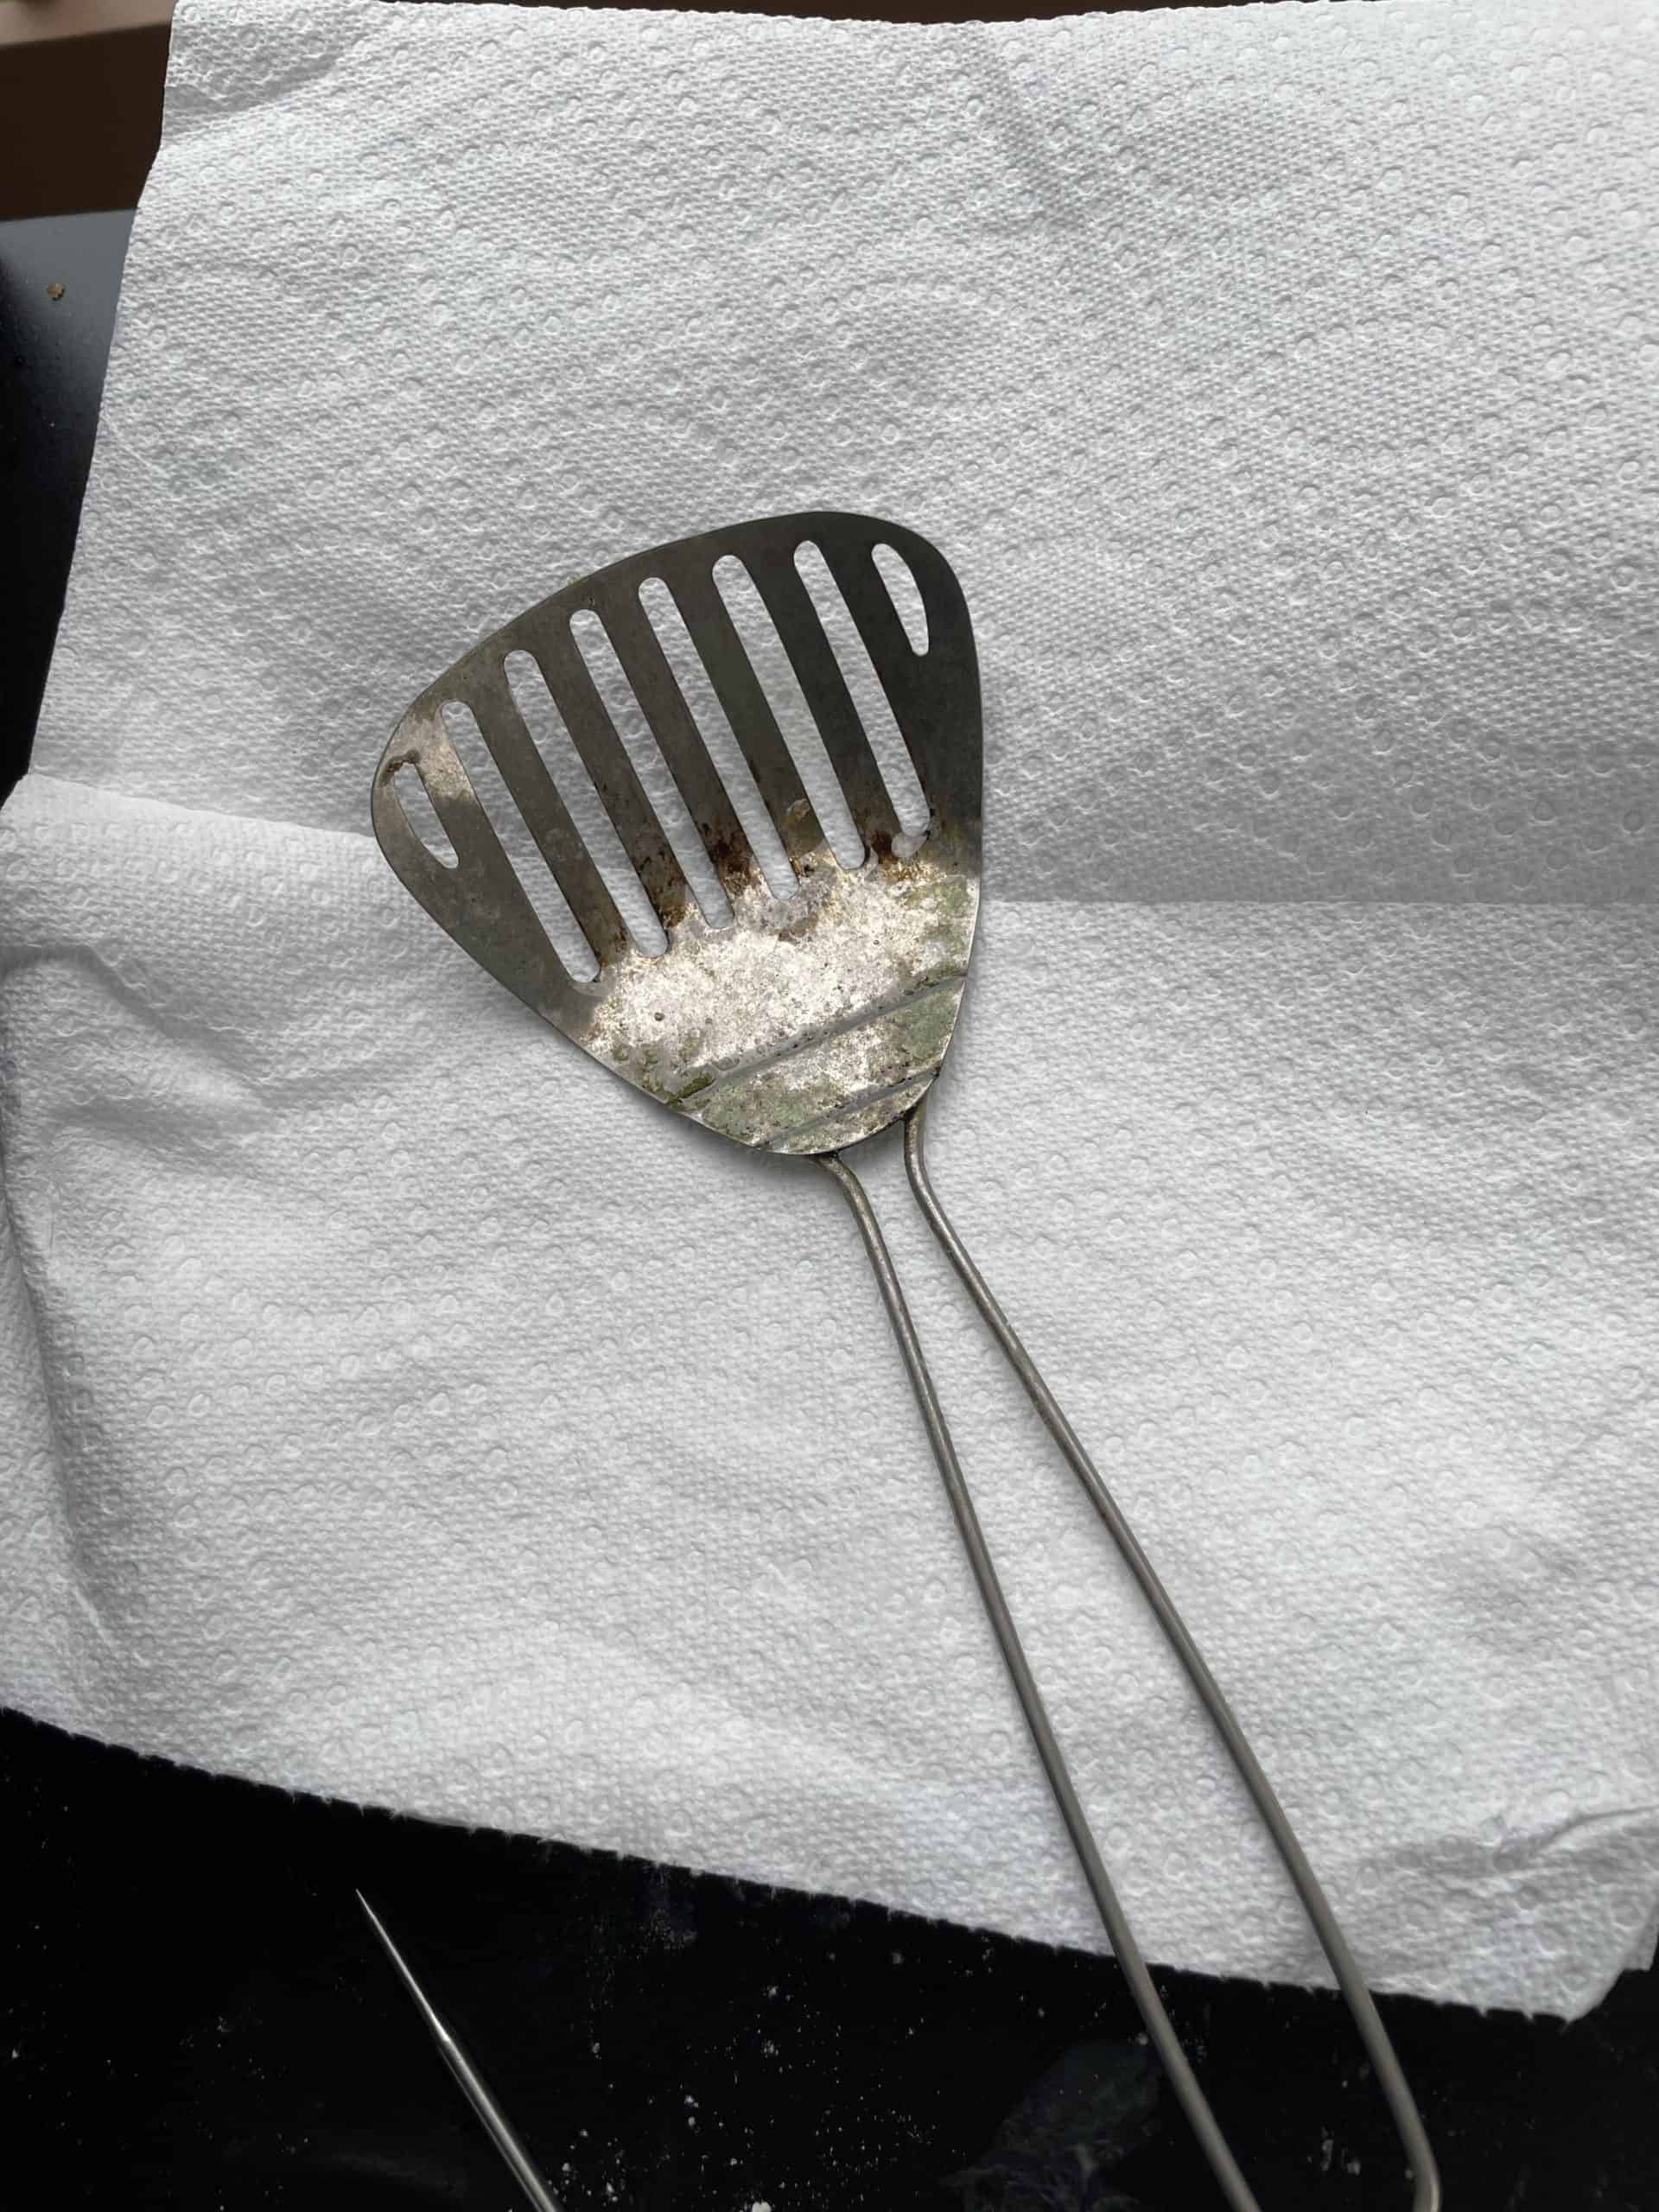 Metal Frying Spoon and a paper towel lined plate.